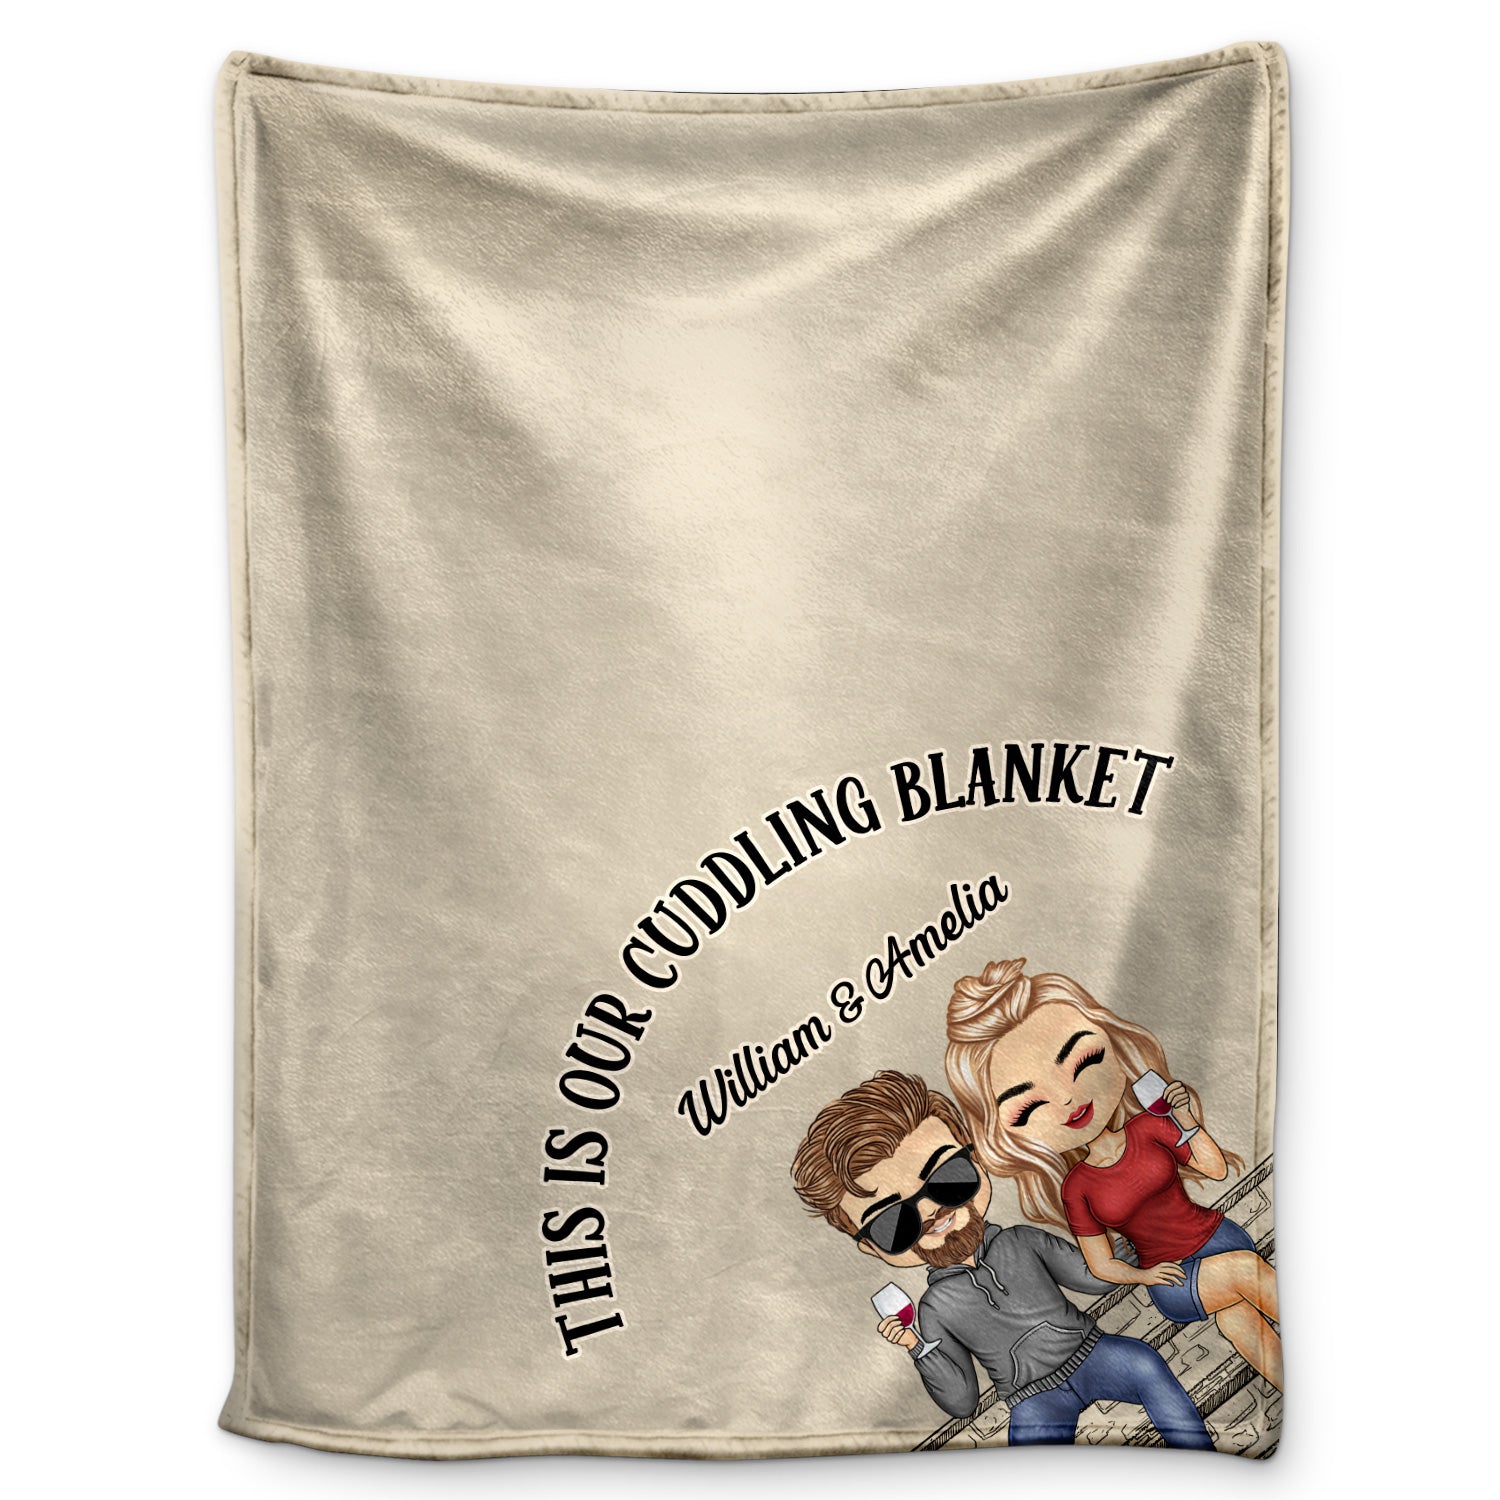 This Is Our Cuddling Blanket Couples - Anniversary, Birthday Gift For Spouse, Husband, Wife, Boyfriend, Girlfriend - Personalized Custom Fleece Blanket